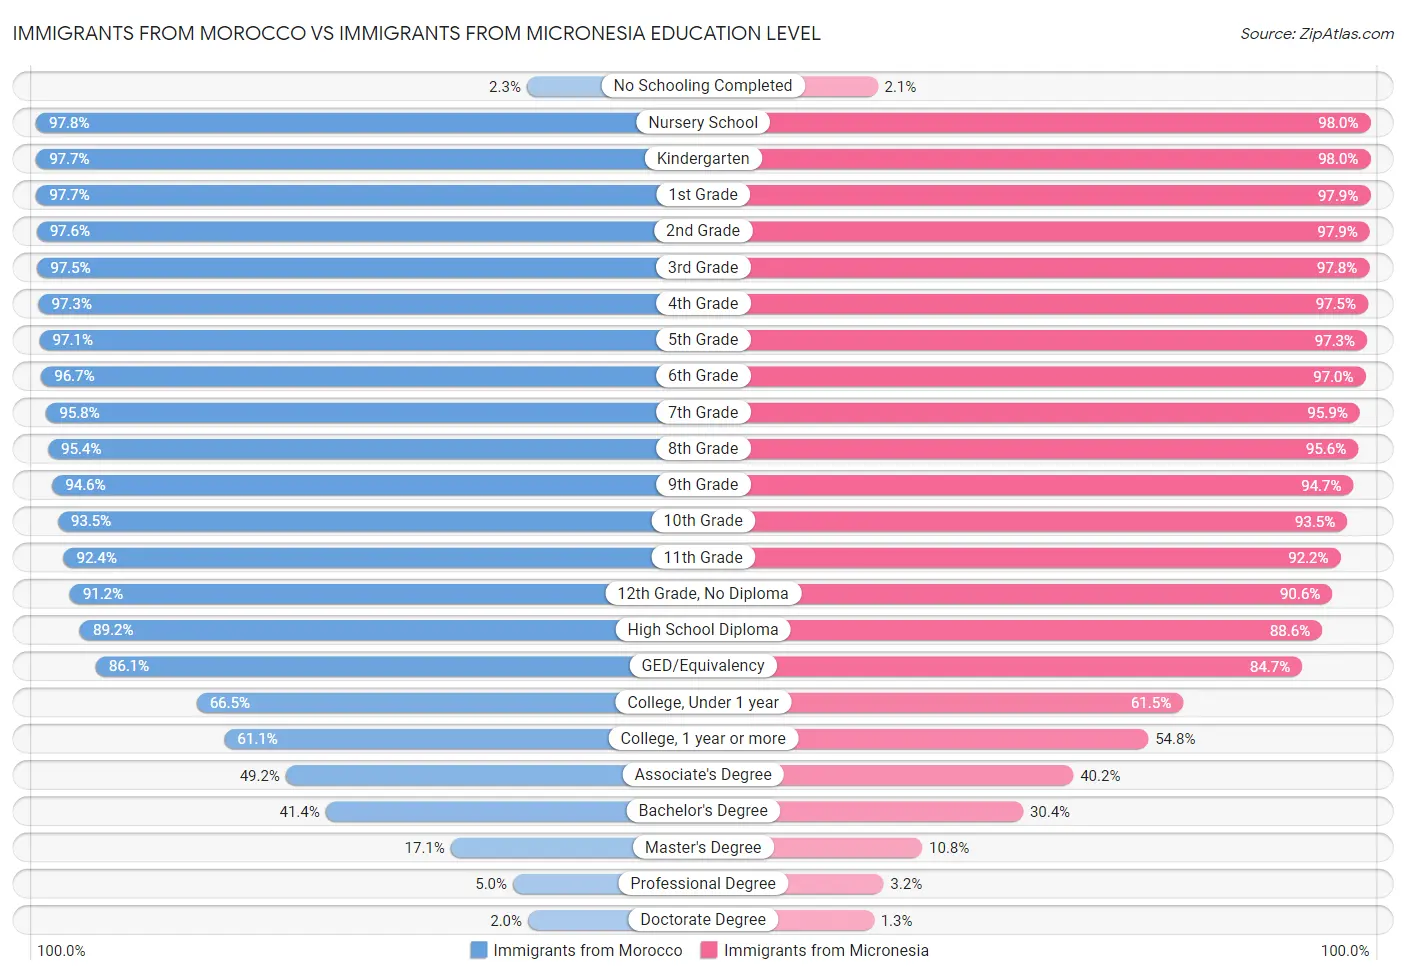 Immigrants from Morocco vs Immigrants from Micronesia Education Level